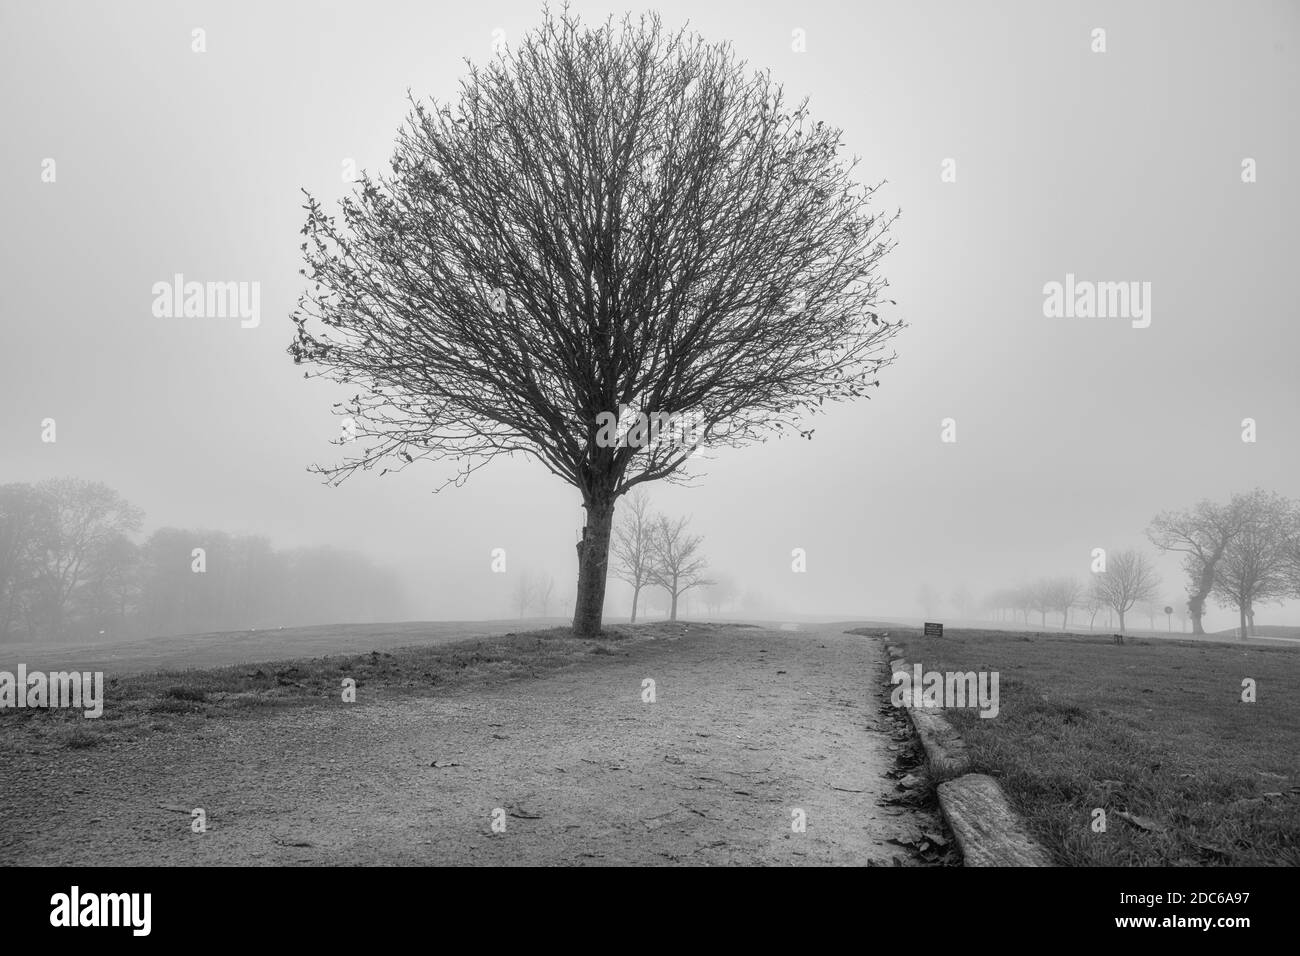 A willow tree in black and white with a misty background. Picture from Scania county, Sweden Stock Photo